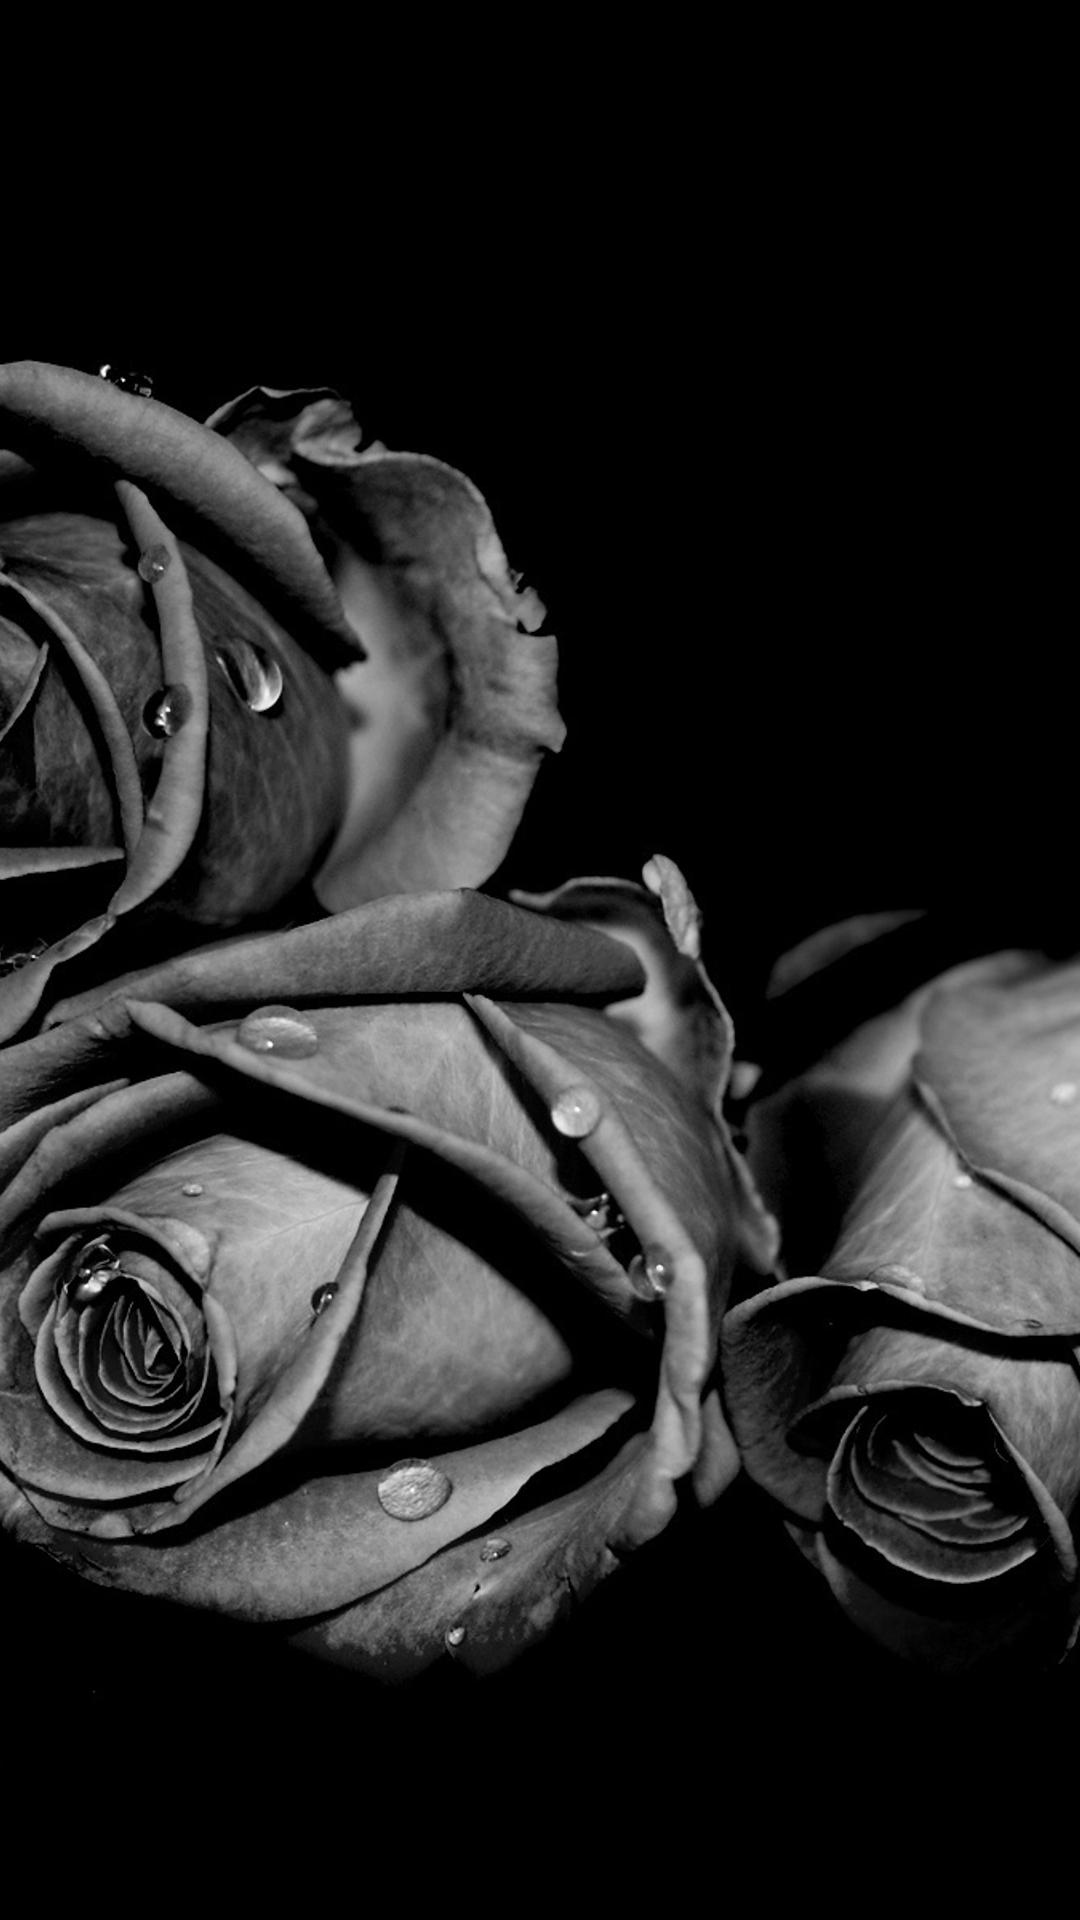 Three gray roses with raindrops in the black background